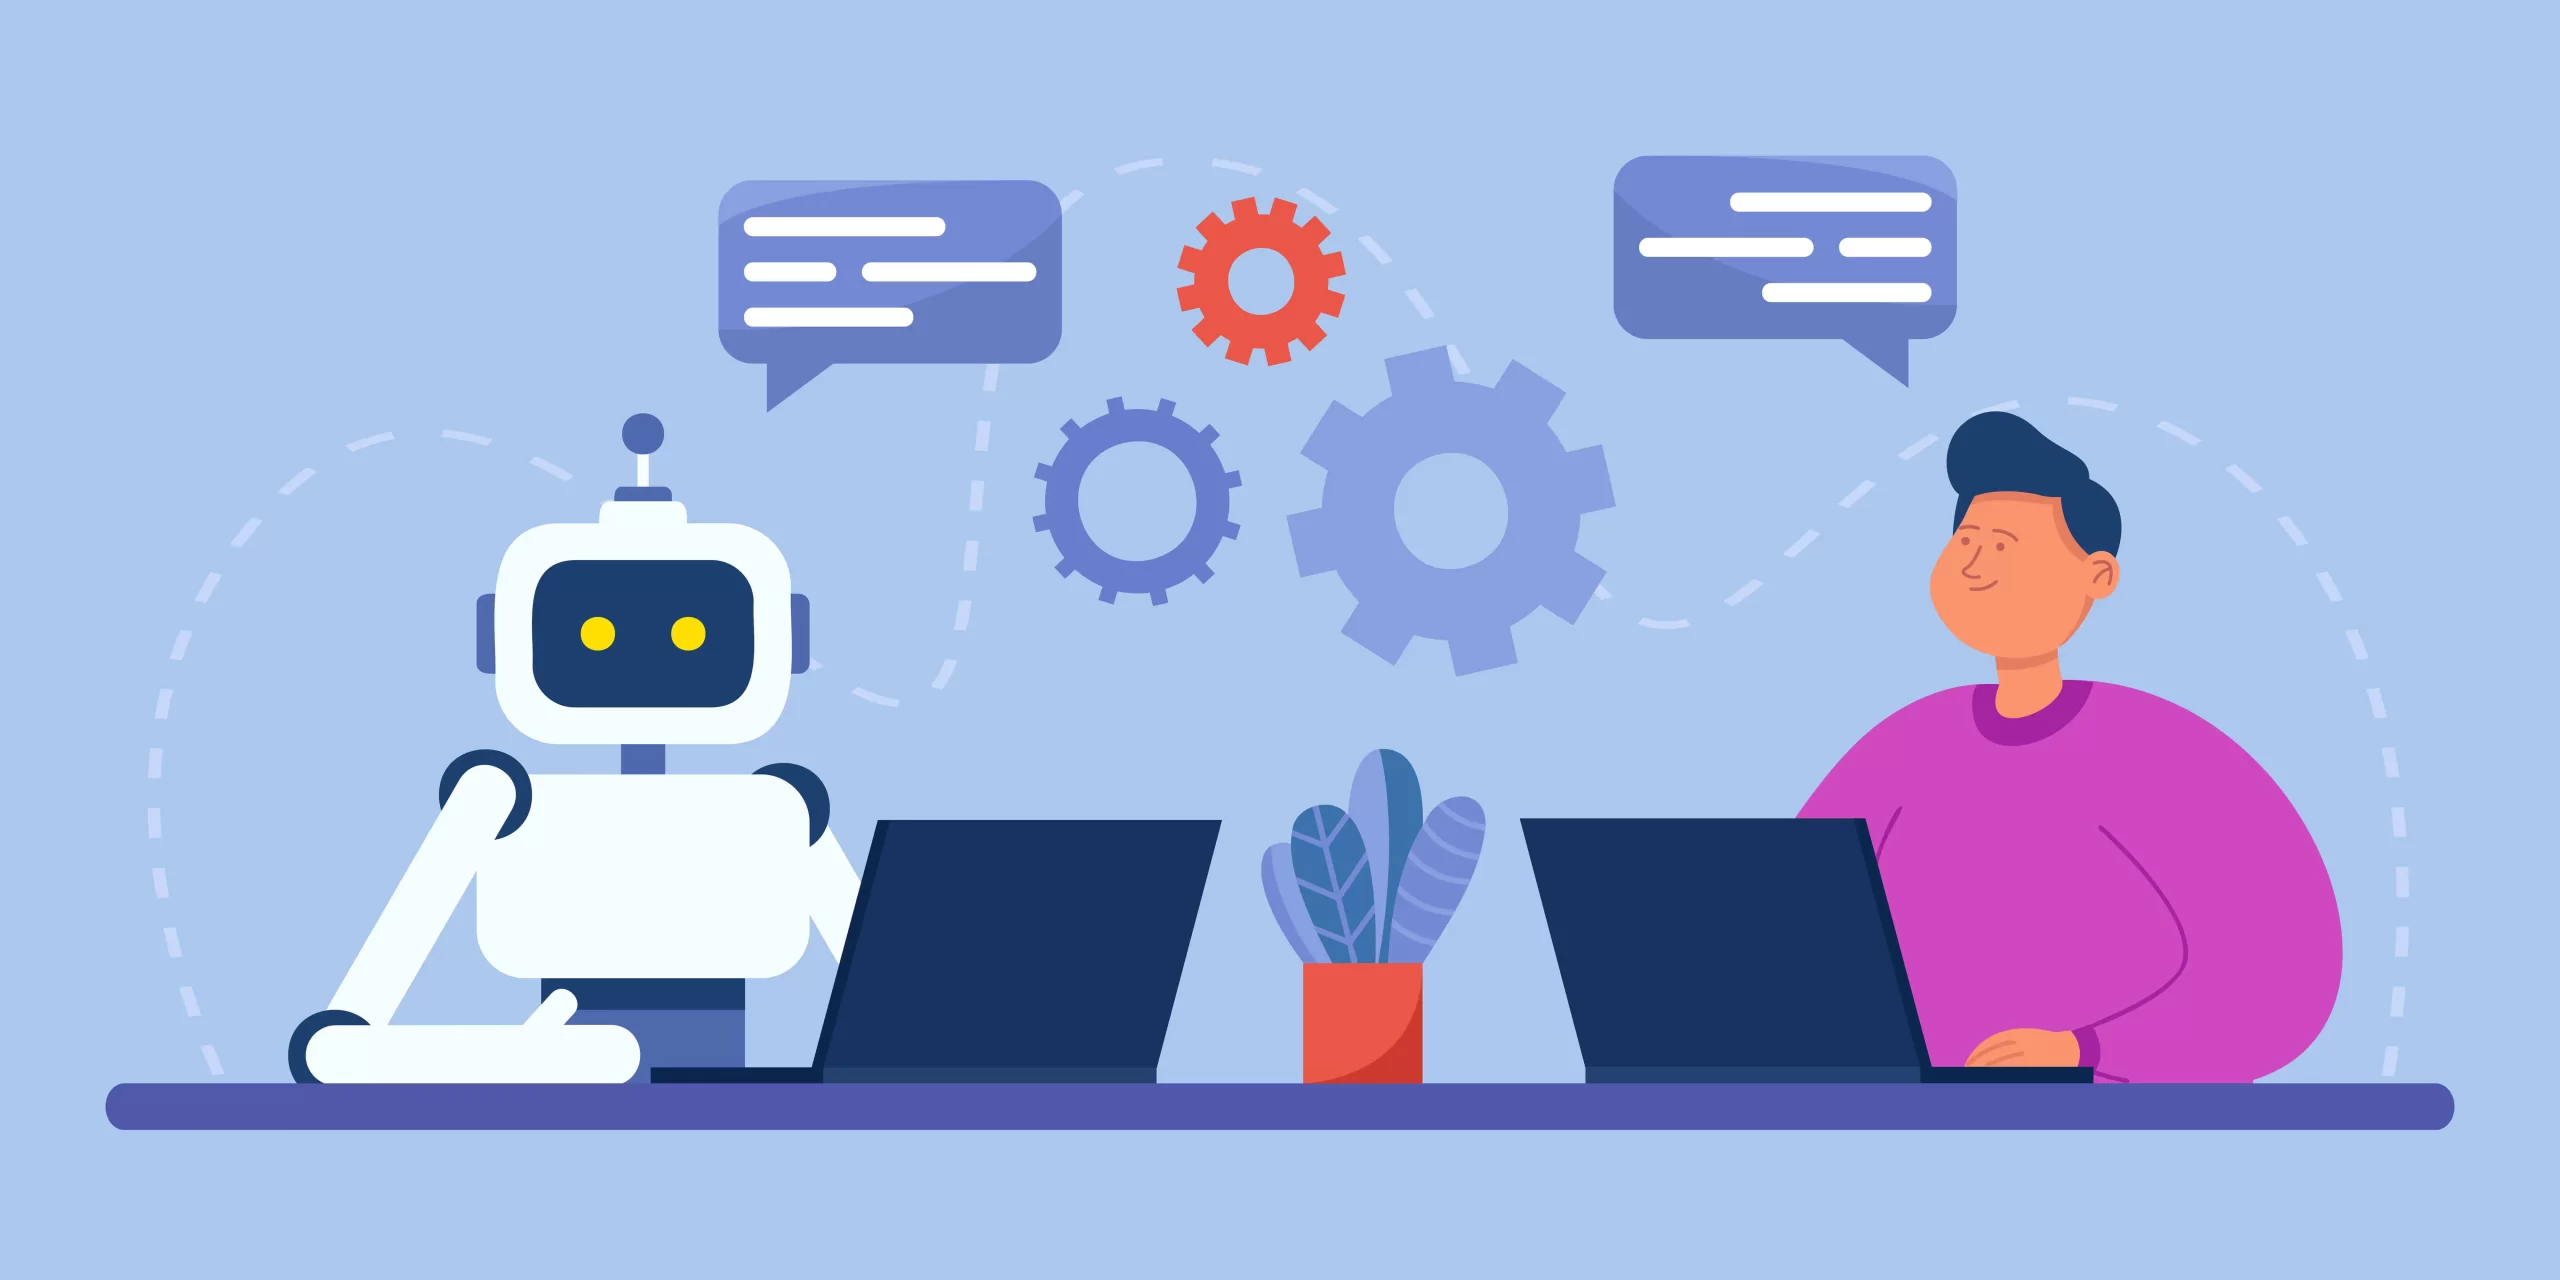 Benefits of Integrating a Chatbot into Your Business